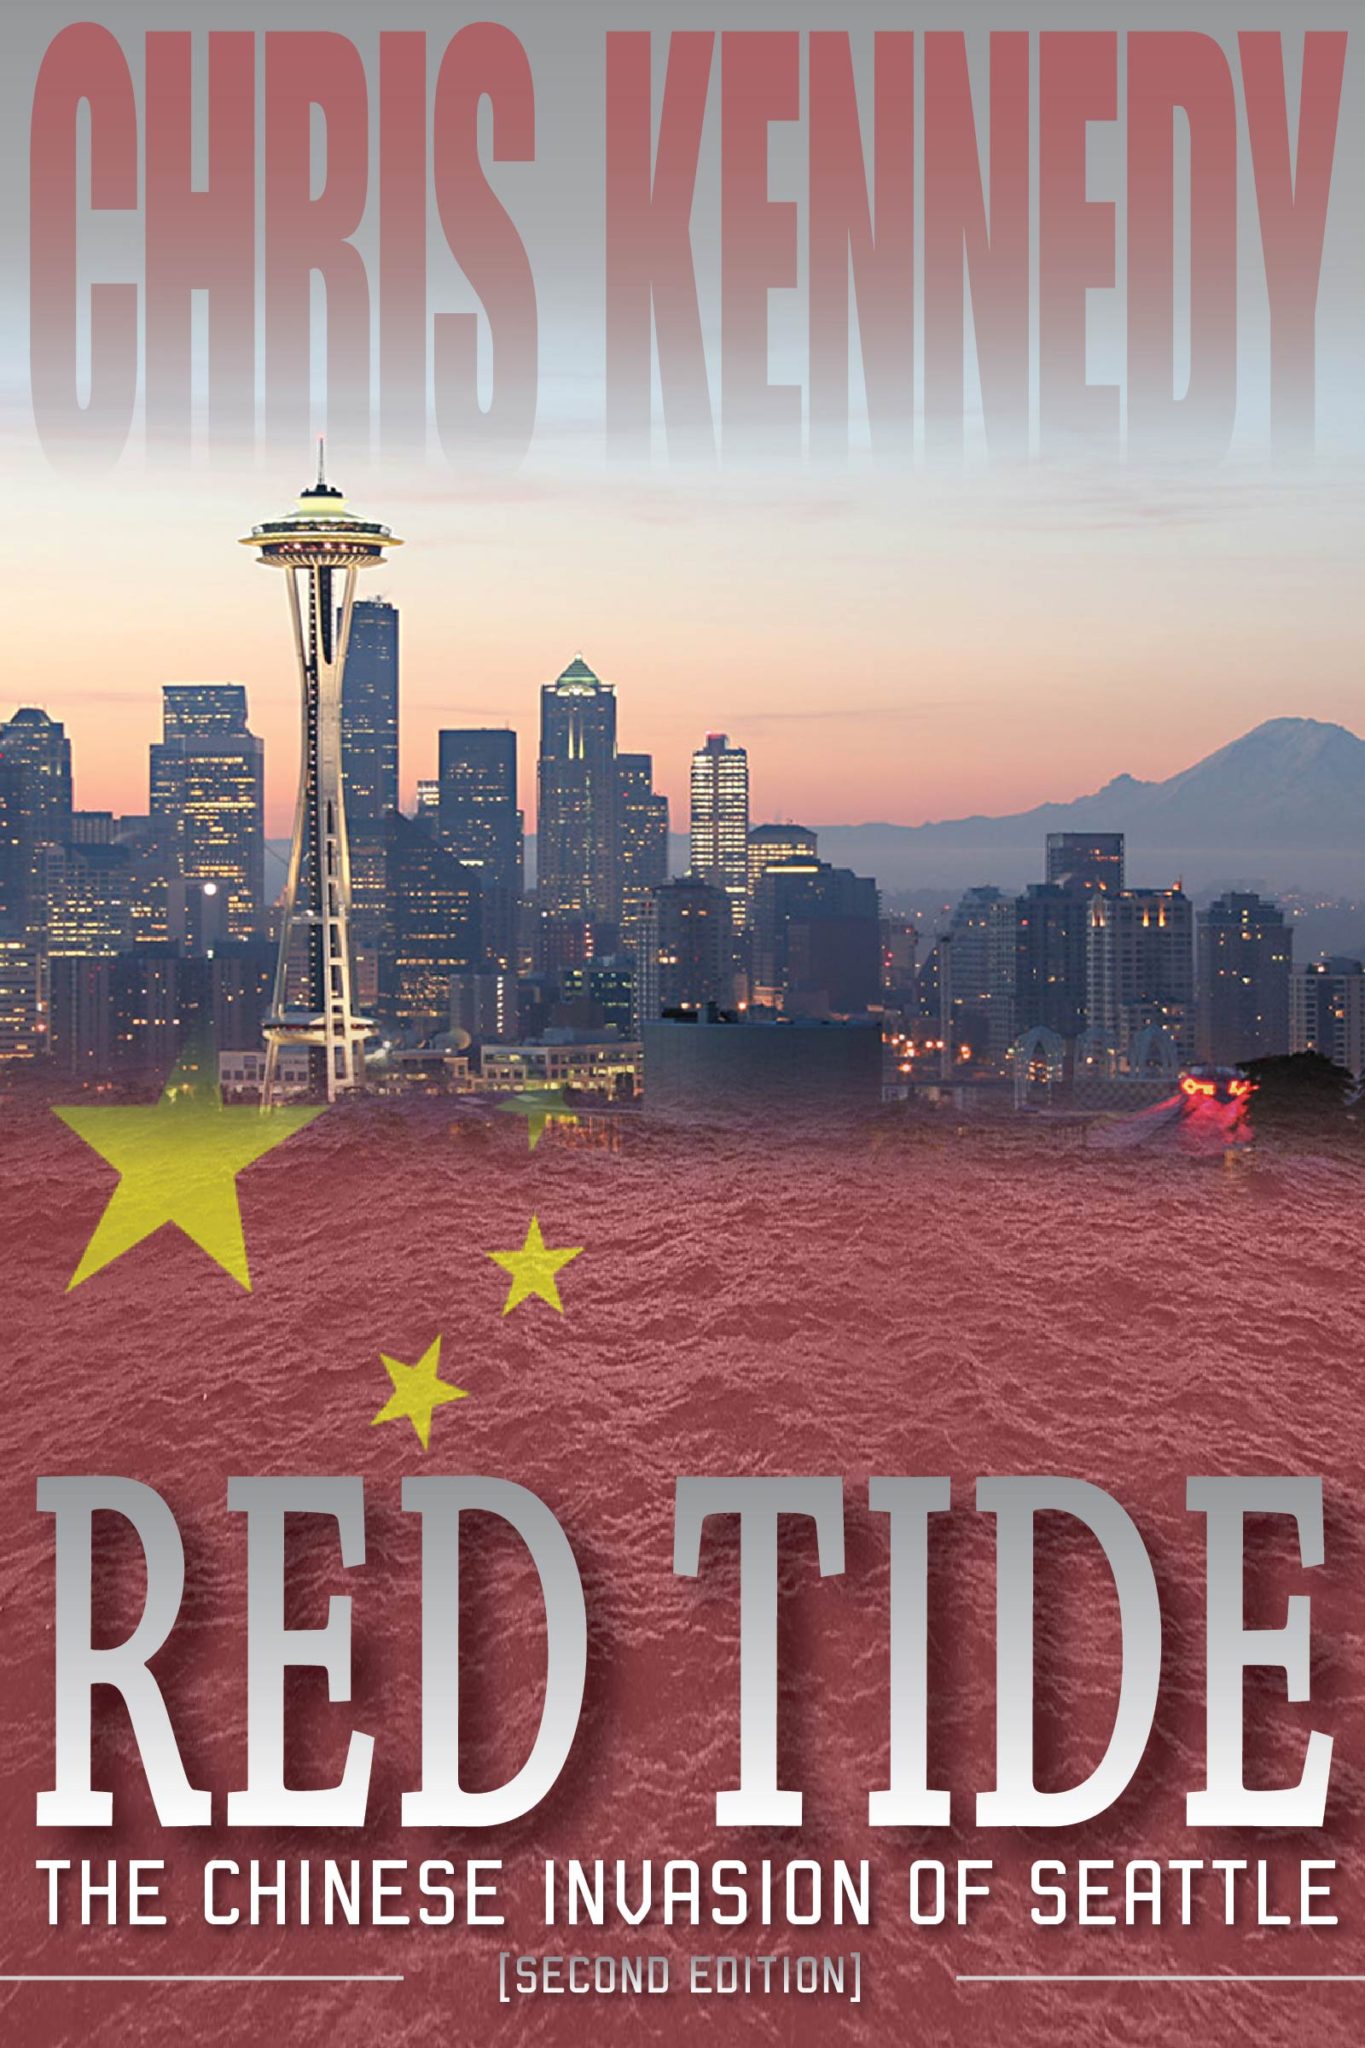 FREE: Red Tide by Chris Kennedy